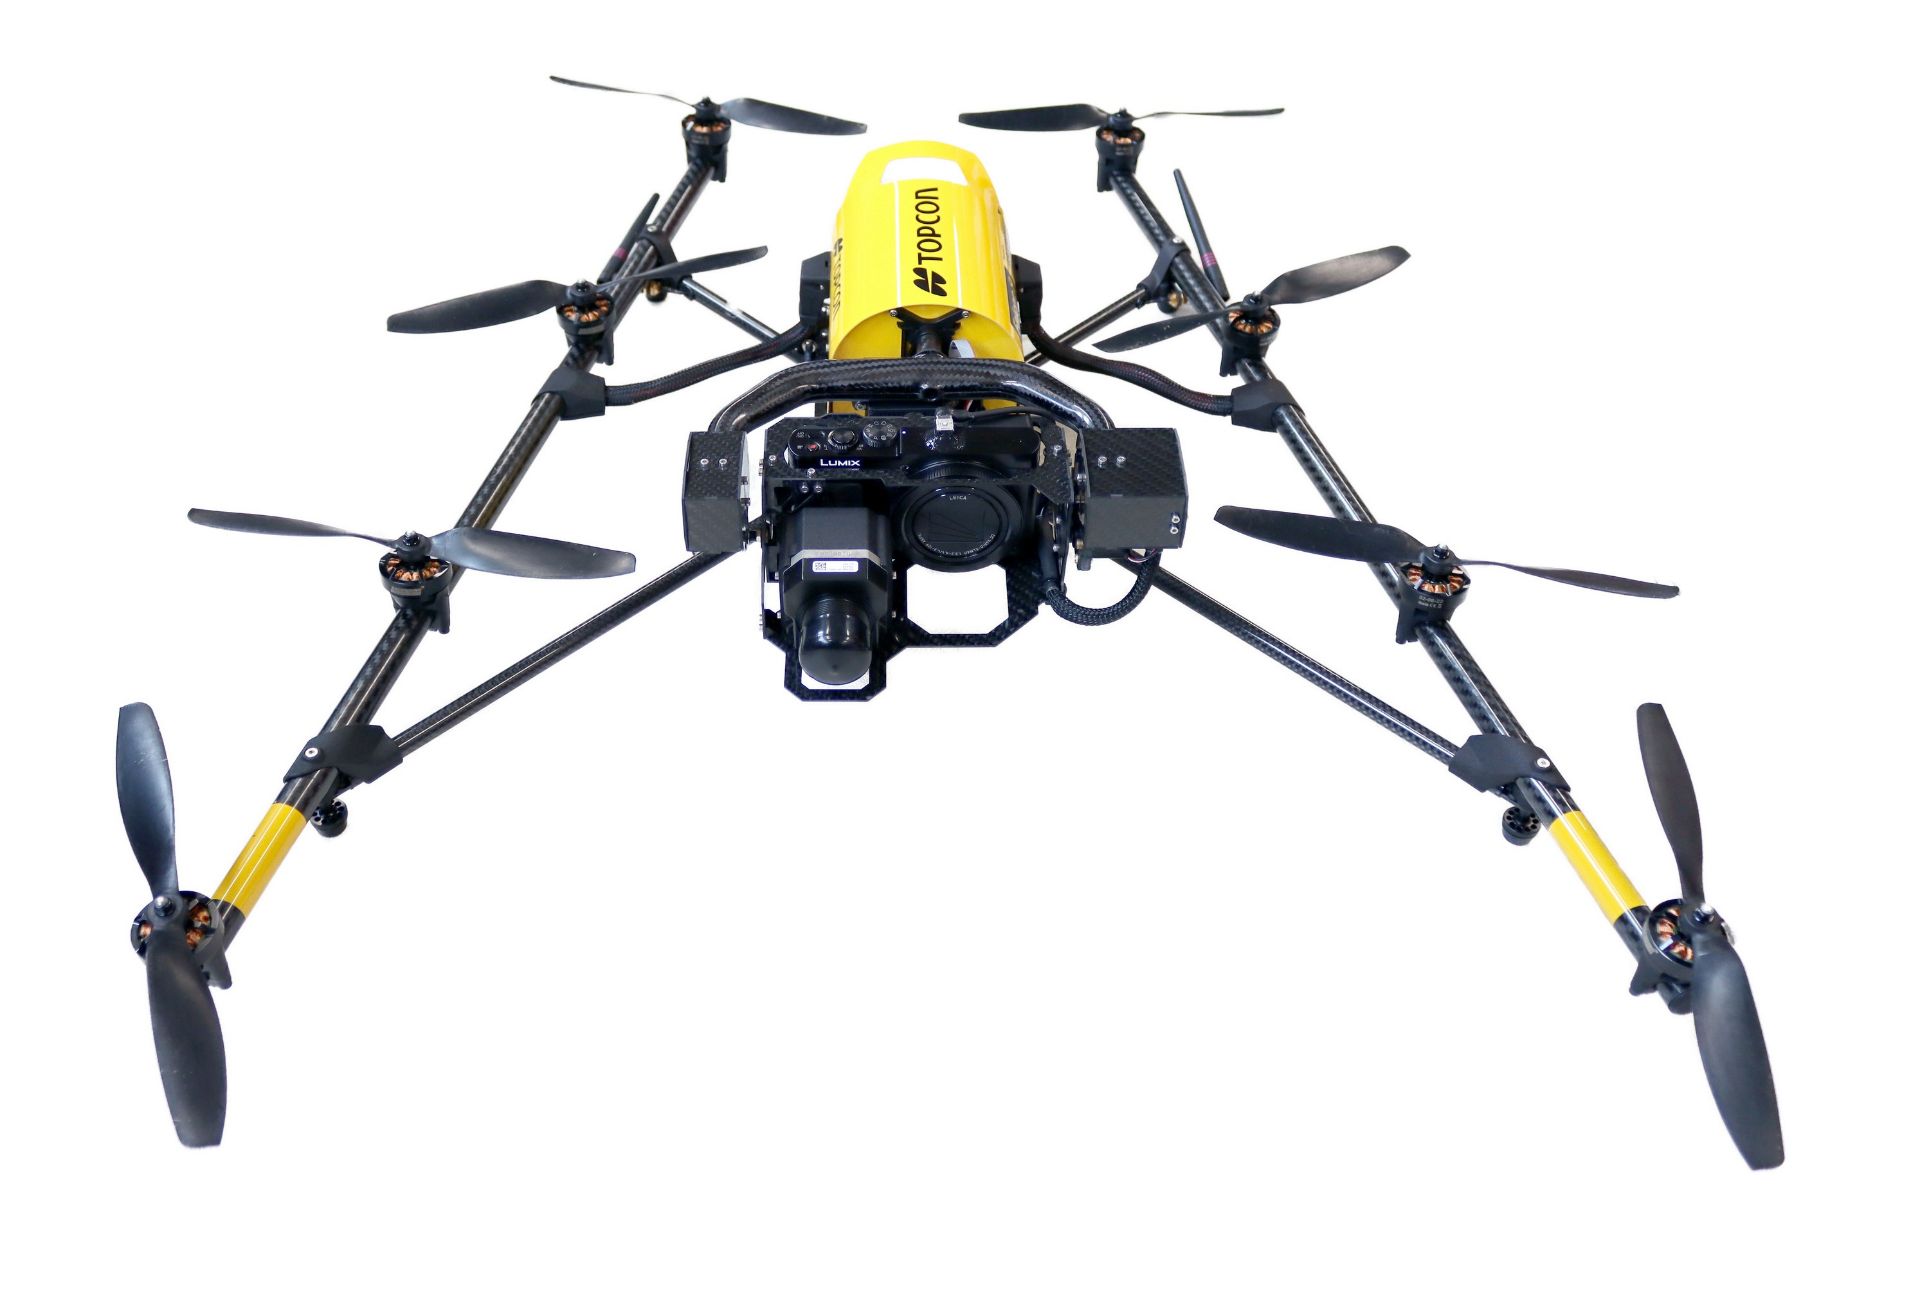 A pre-owned Topcon Falcon 8 Commercial Drone with InspectionPro payload (Infrared imaging) and loads